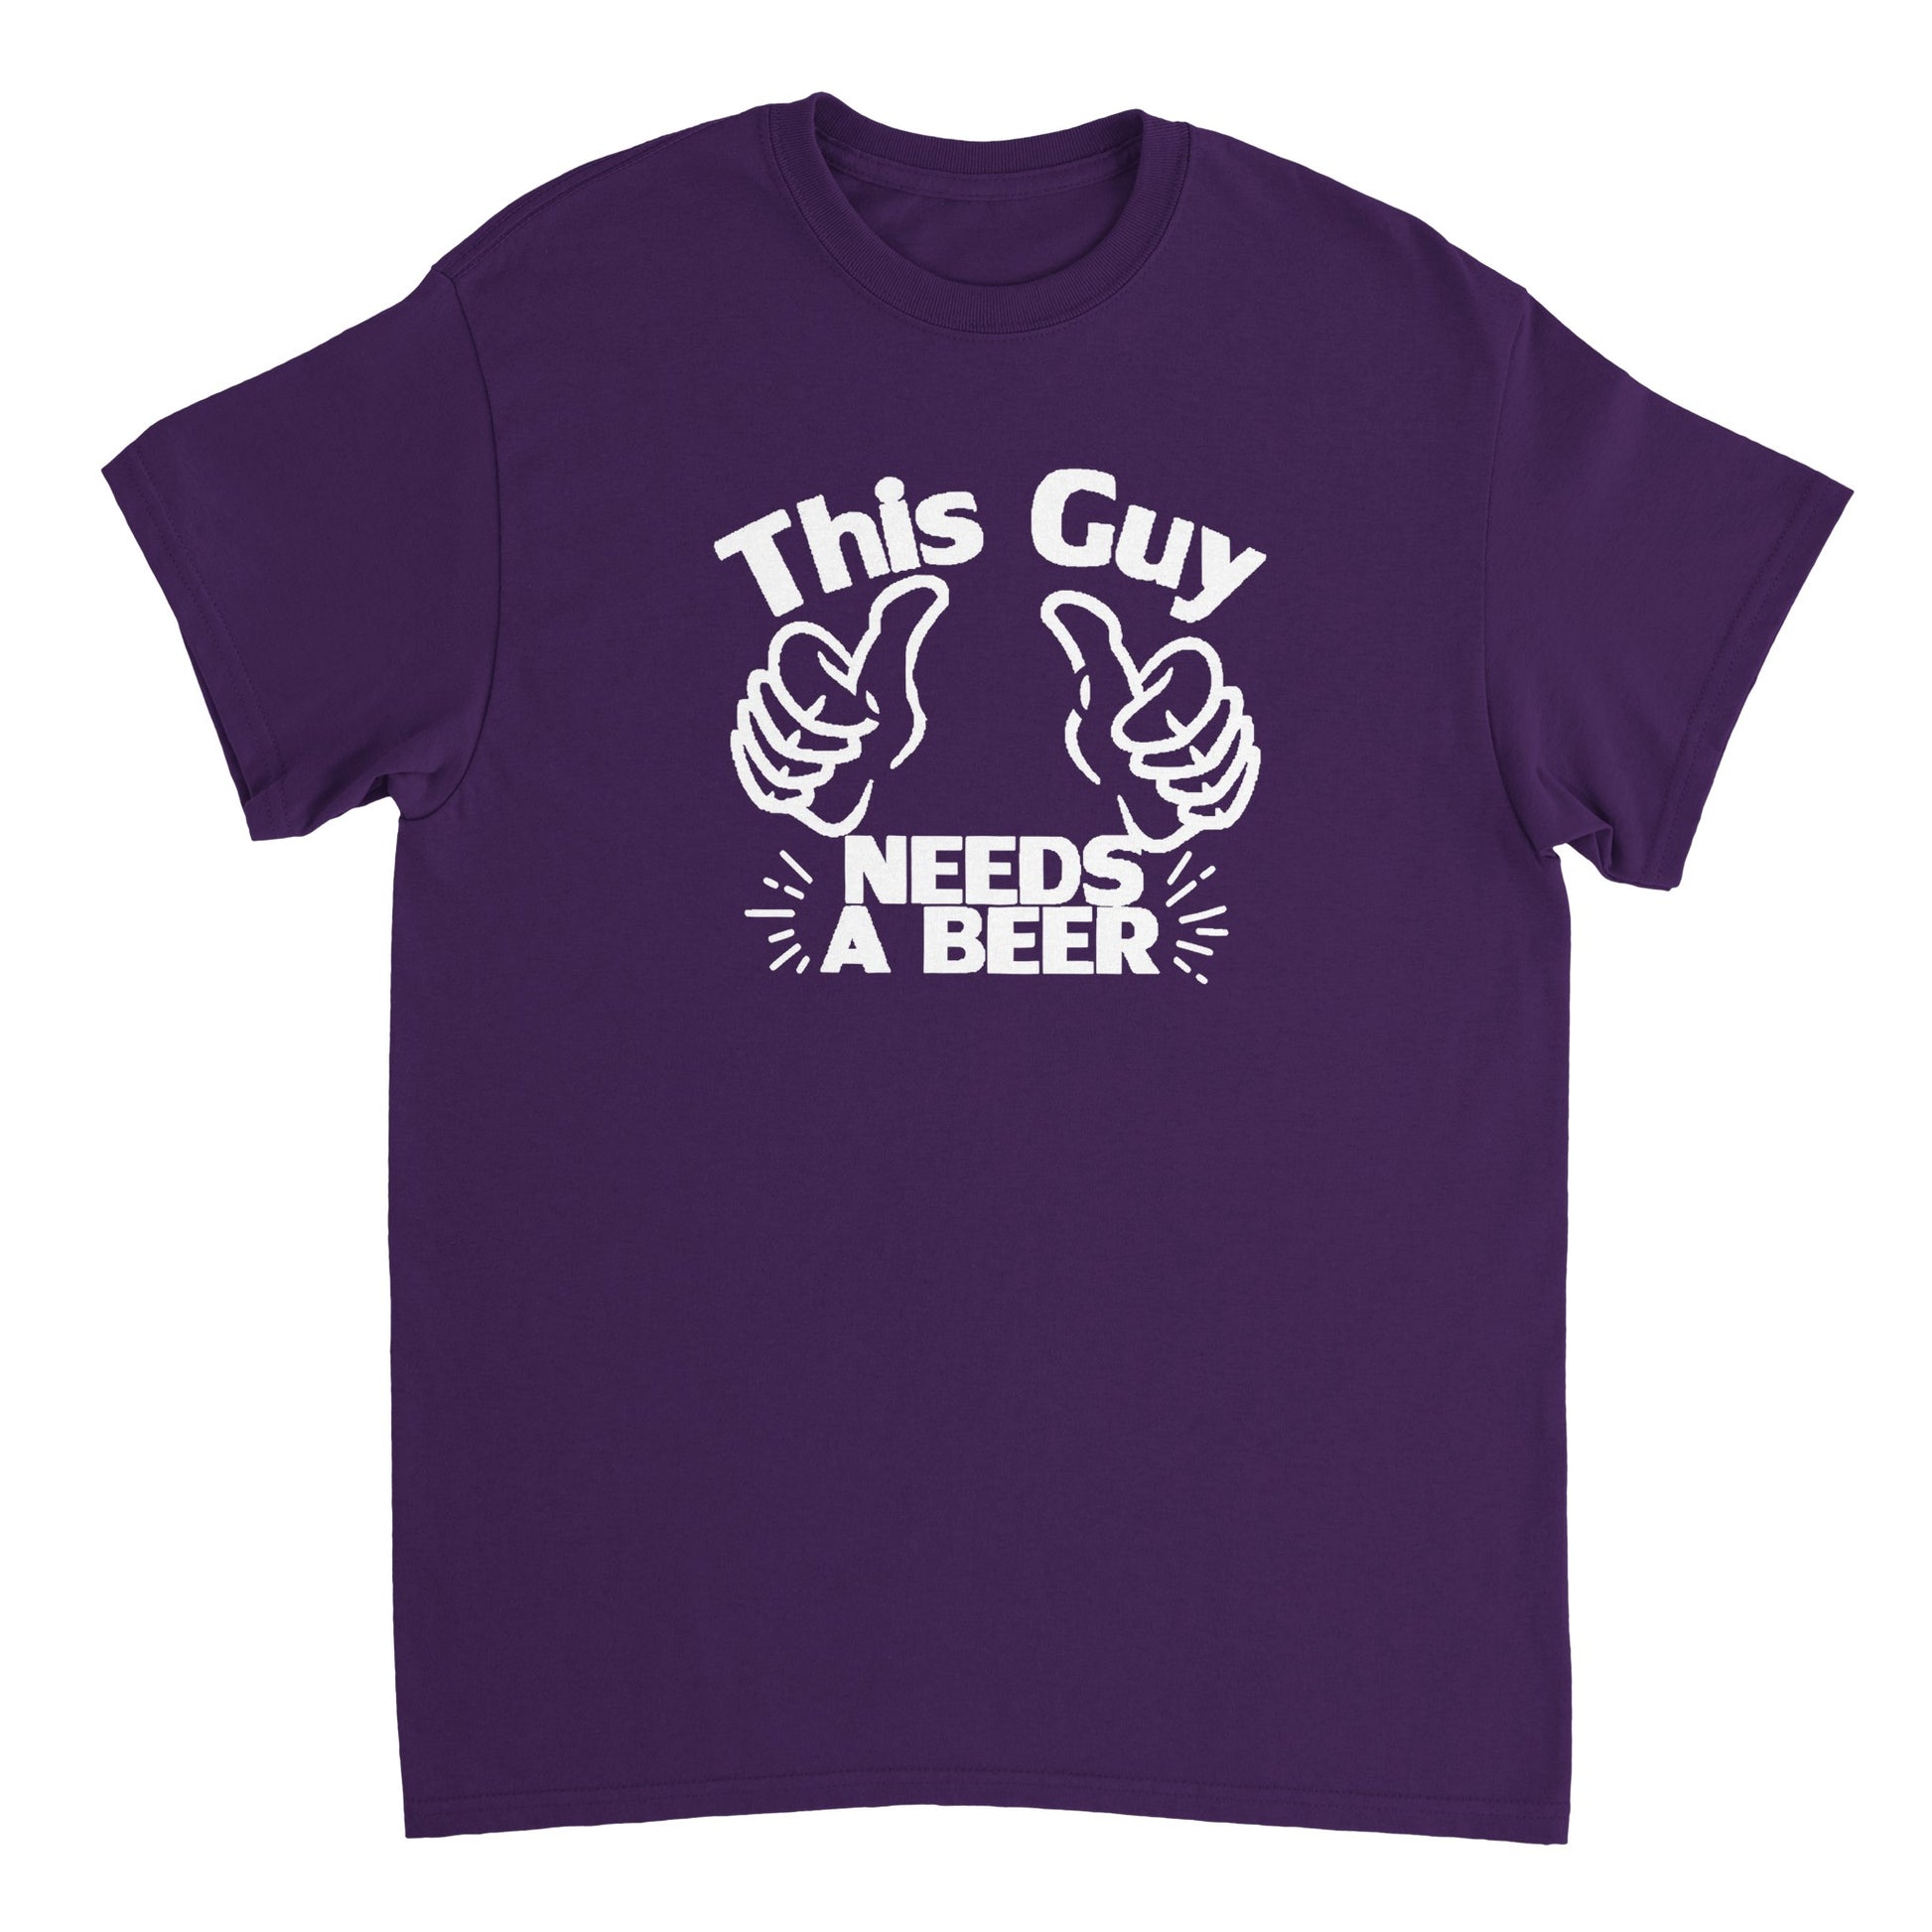 This Guy Needs a Beer T-shirt - Mister Snarky's